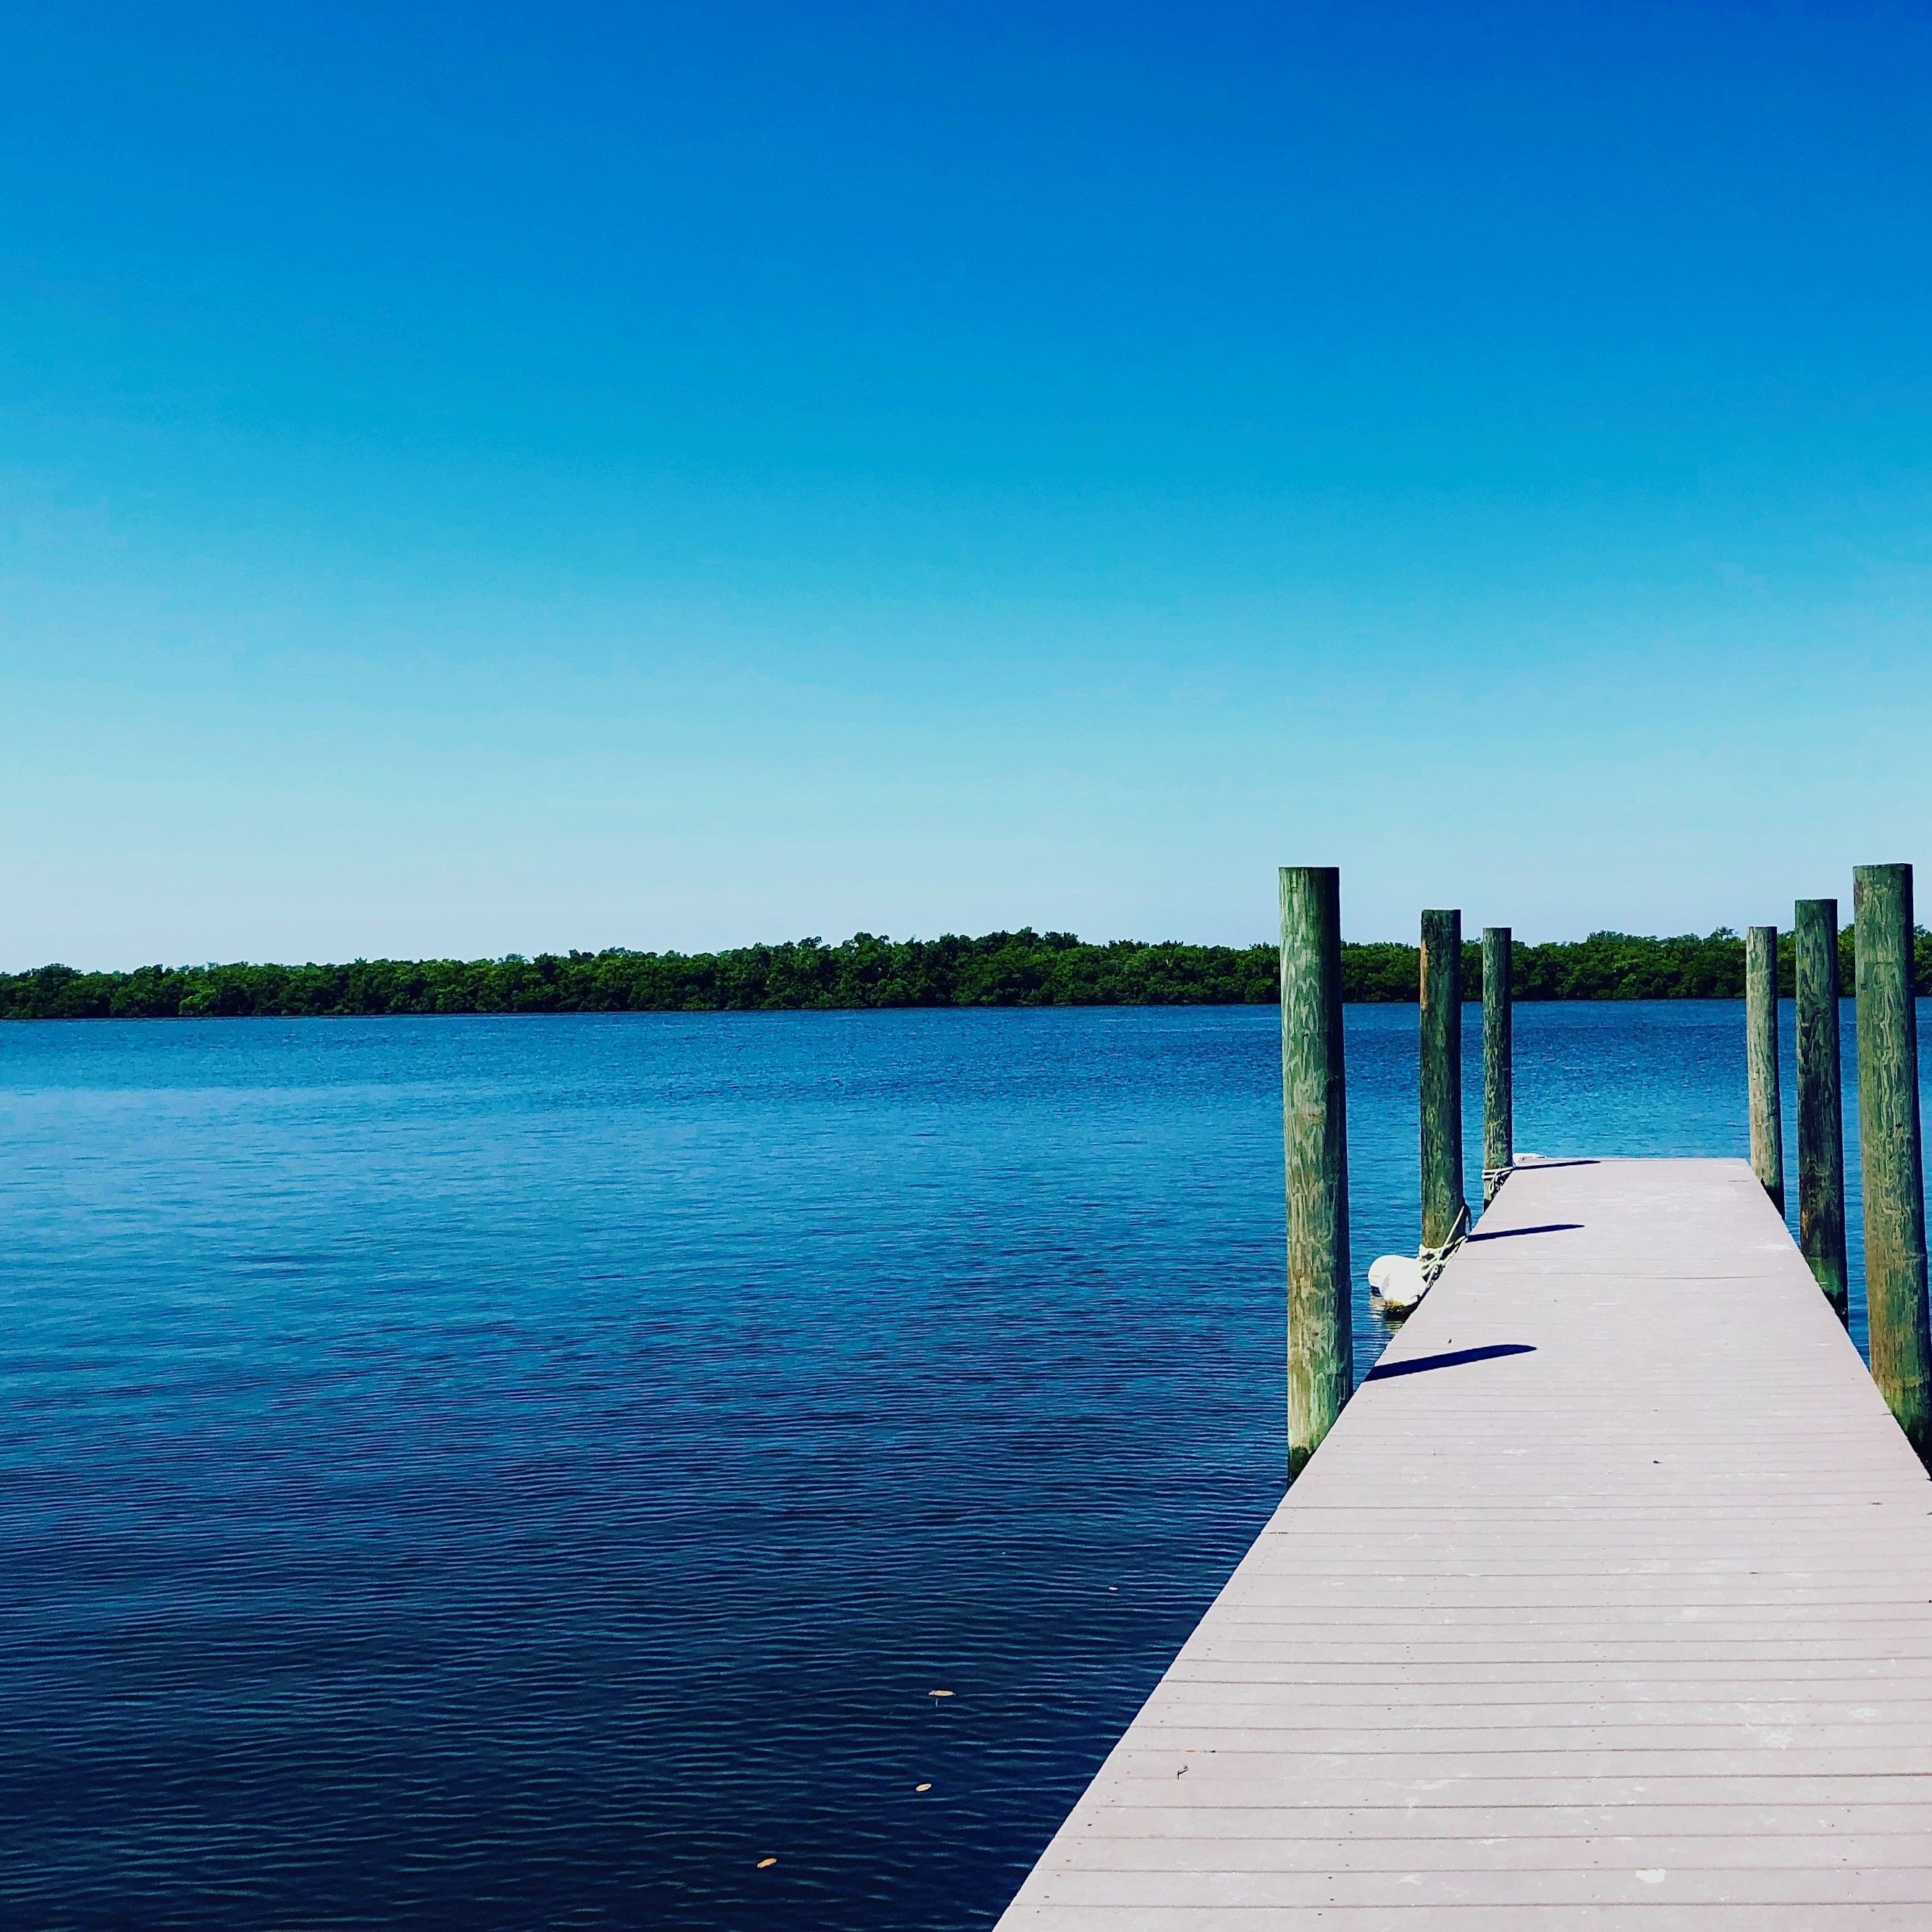 Long dock out over the blue water.